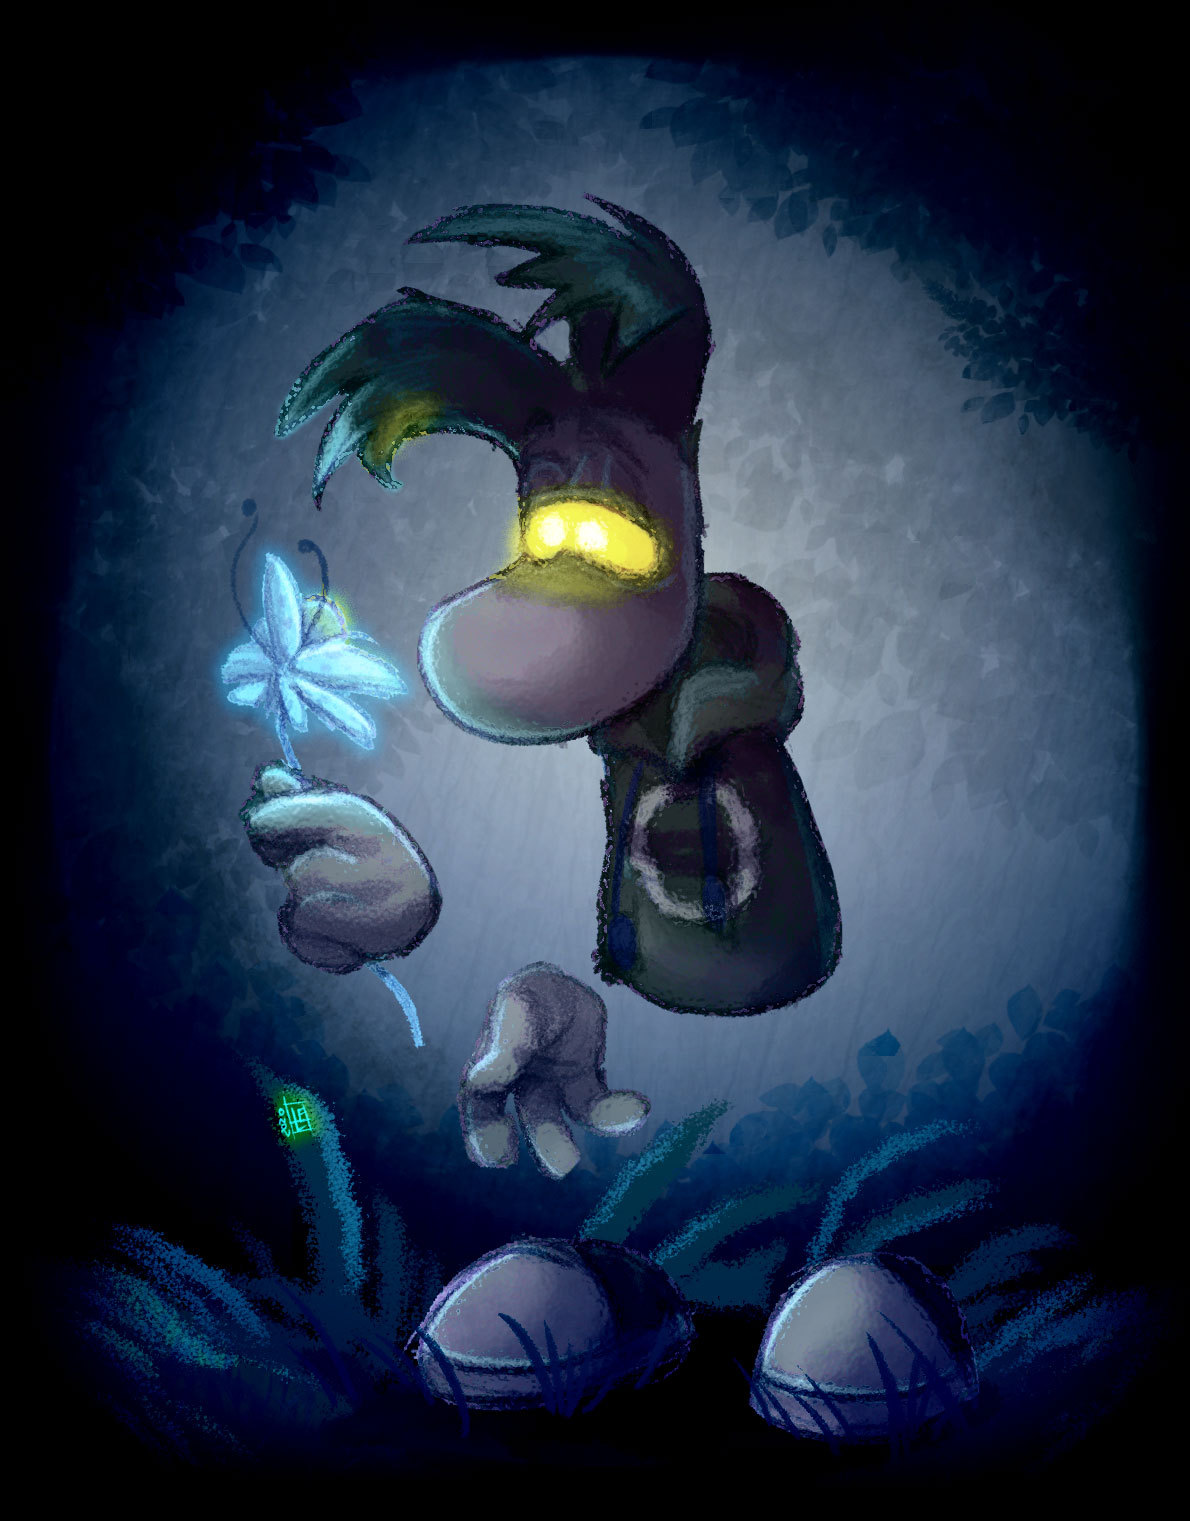 This is one of theses sketchs where I add some shadow and light effect.
I wanted to draw one of Rayman’s evil clones, but which one ? There’s so manie, actually. So here’s the Bad Rayman, also know as Rayman Black and White, who’s the evil one who...